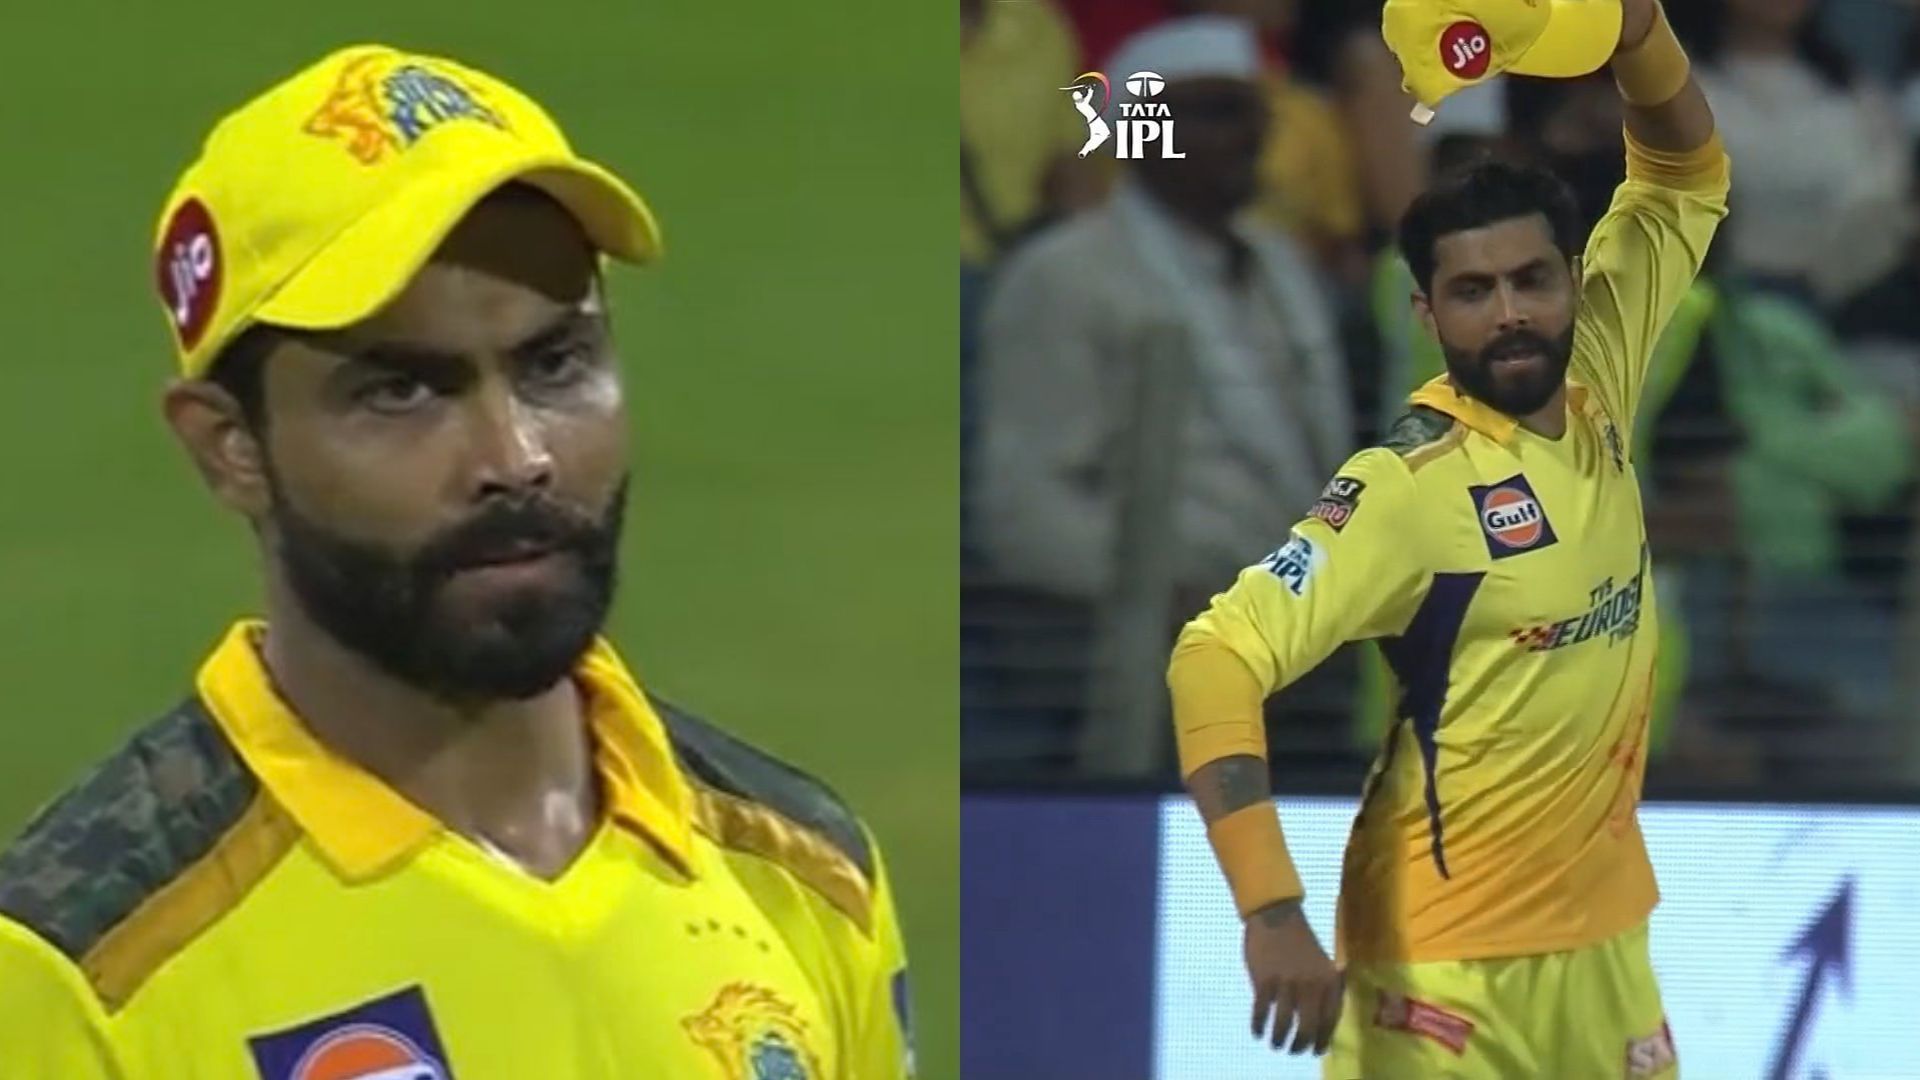 Ravindra Jadeja was underwhelming as a captain, but Chopra reckons he is not the one to be blamed. (P.C.:iplt20.com)